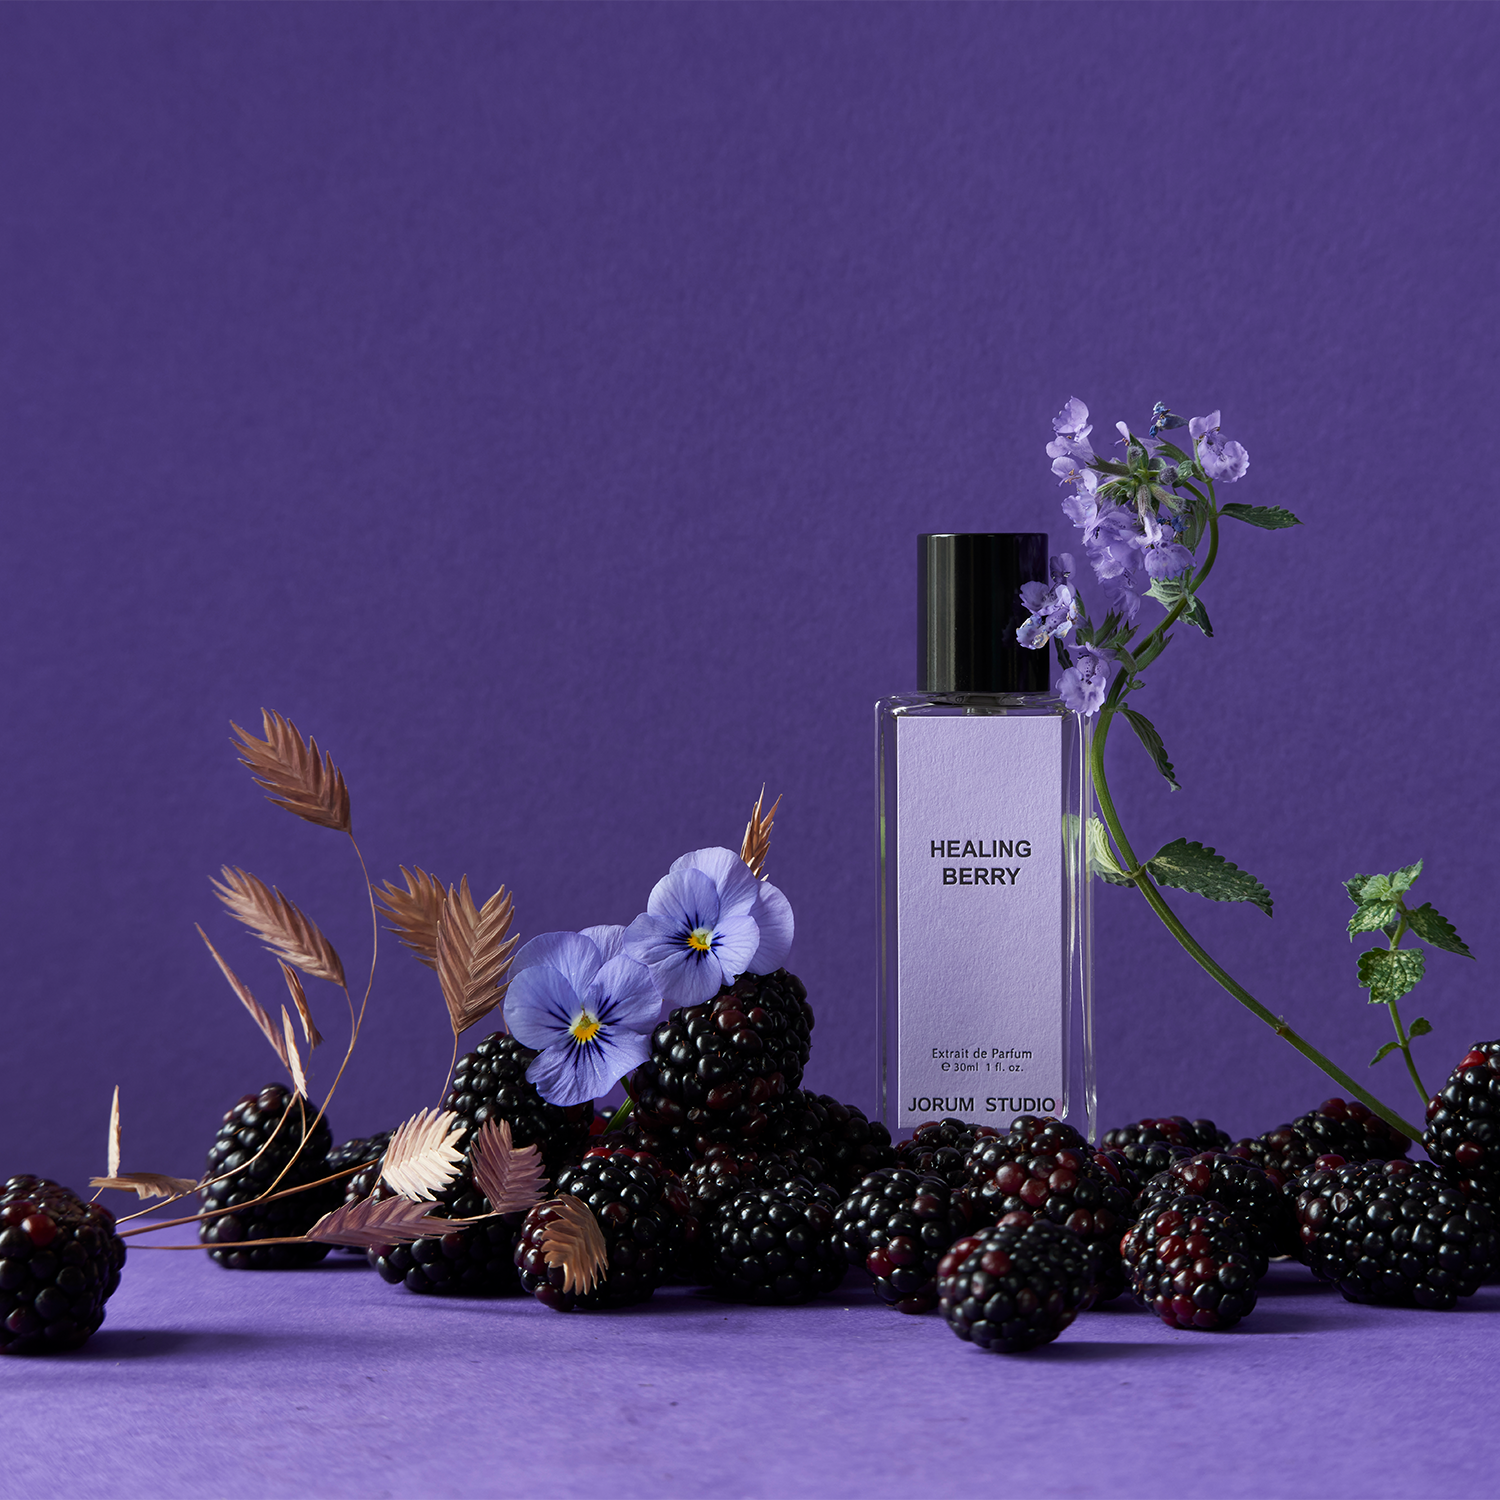 Jorum Studio Healing Berry perfume bottle arranged in a still-life featuring blackberries, violets and barley grains against a purple background